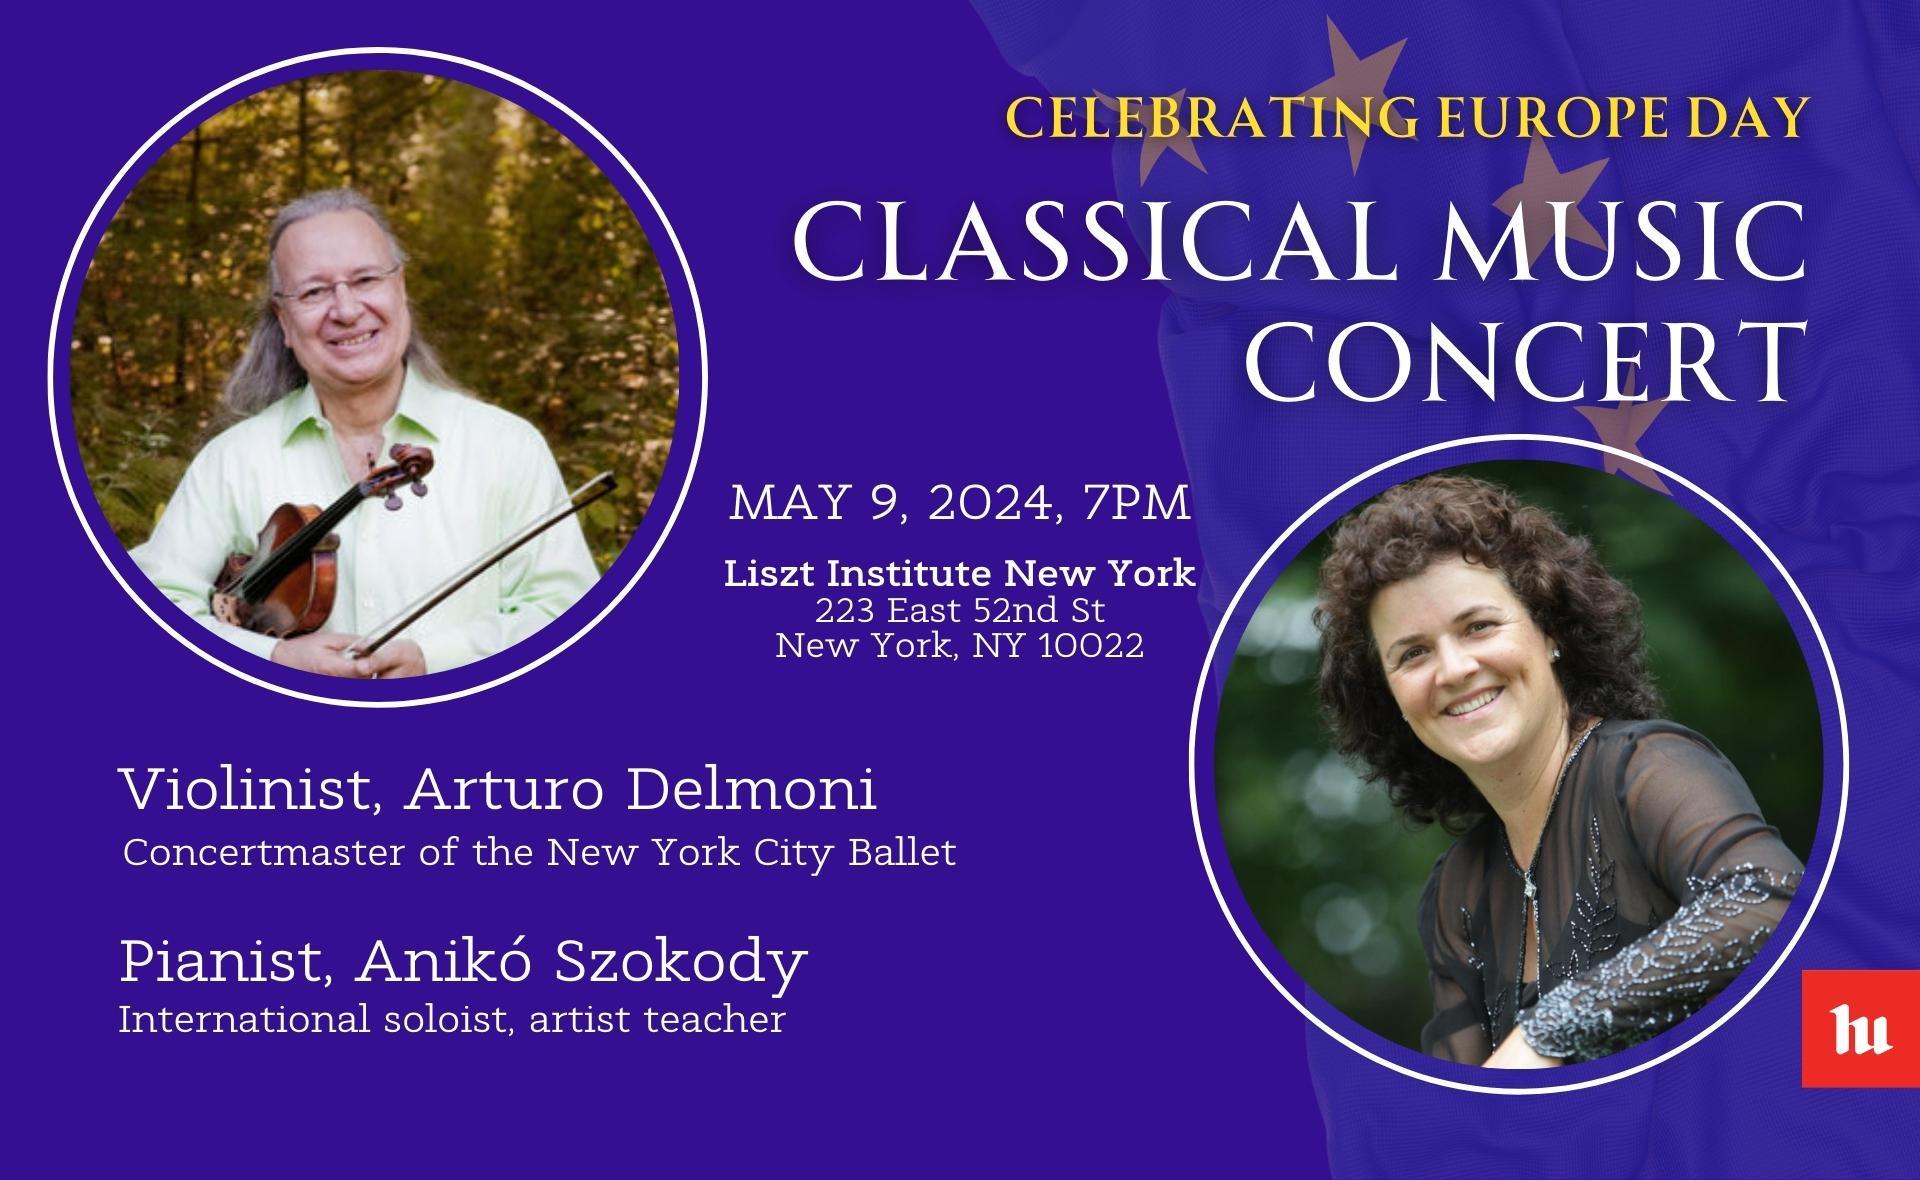 Classical Music Concert celebrating Europe Day